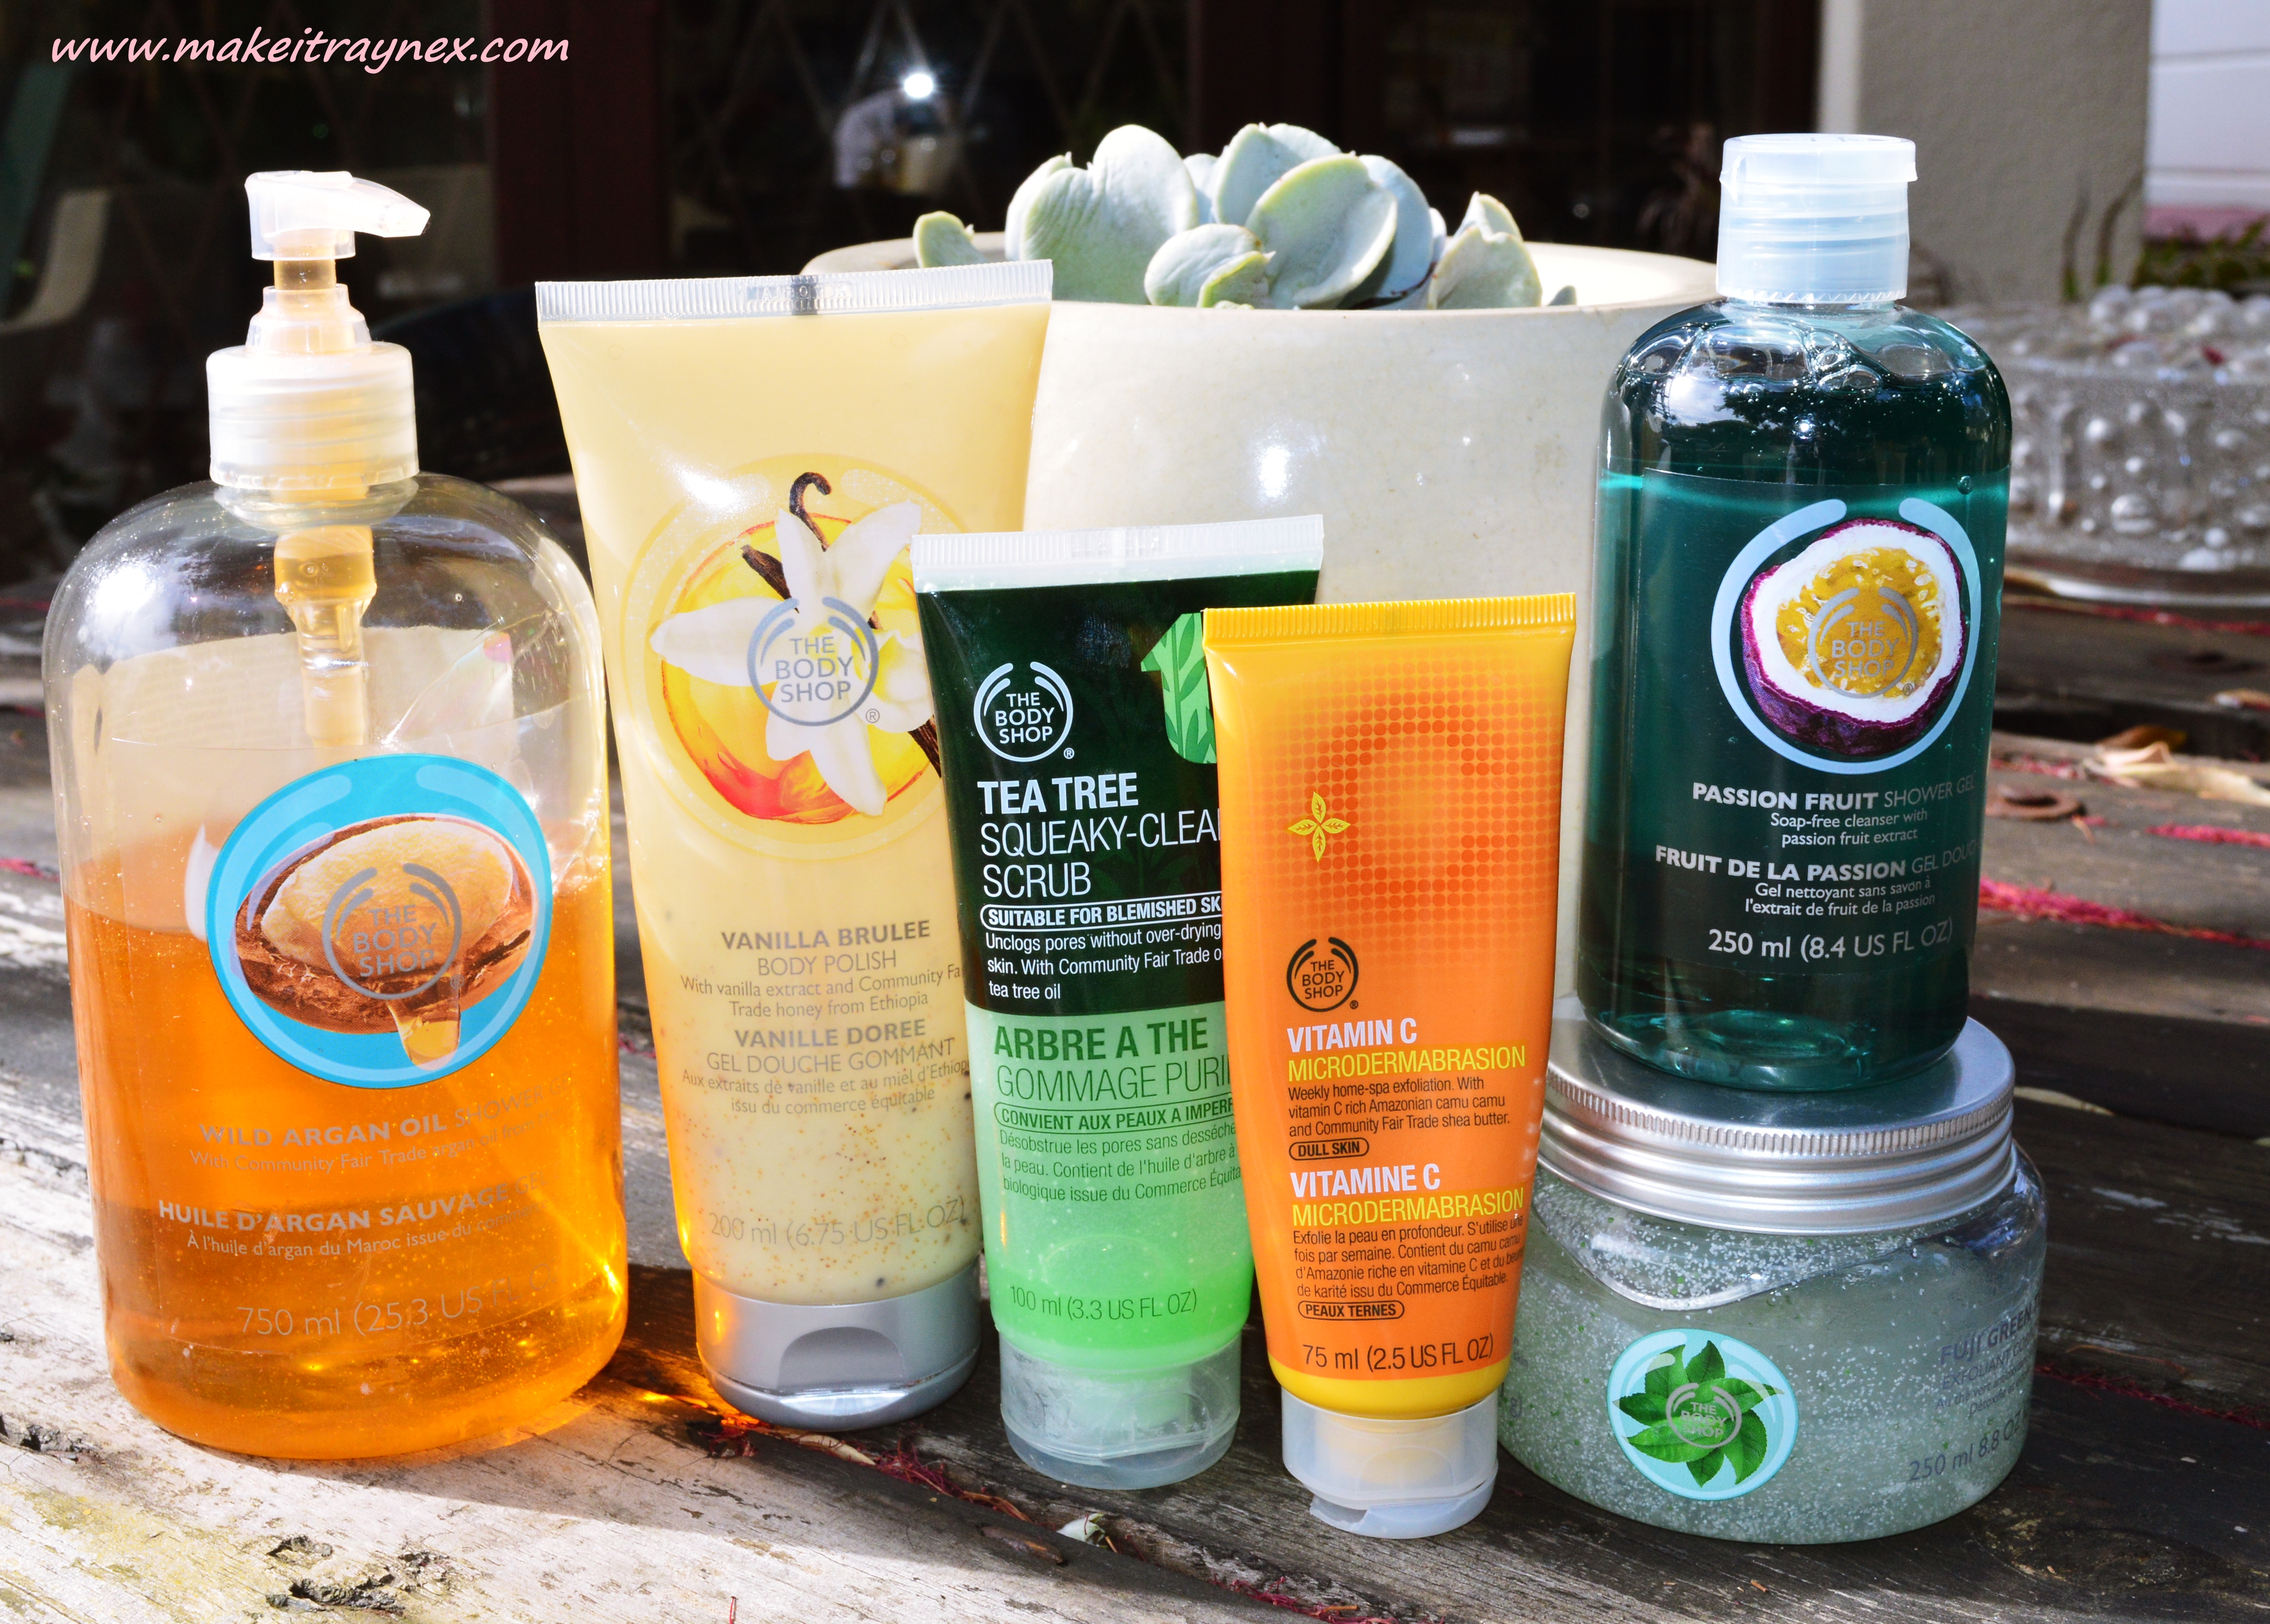 The Best of THE BODY SHOP 2015 {BEST OF - 2015}